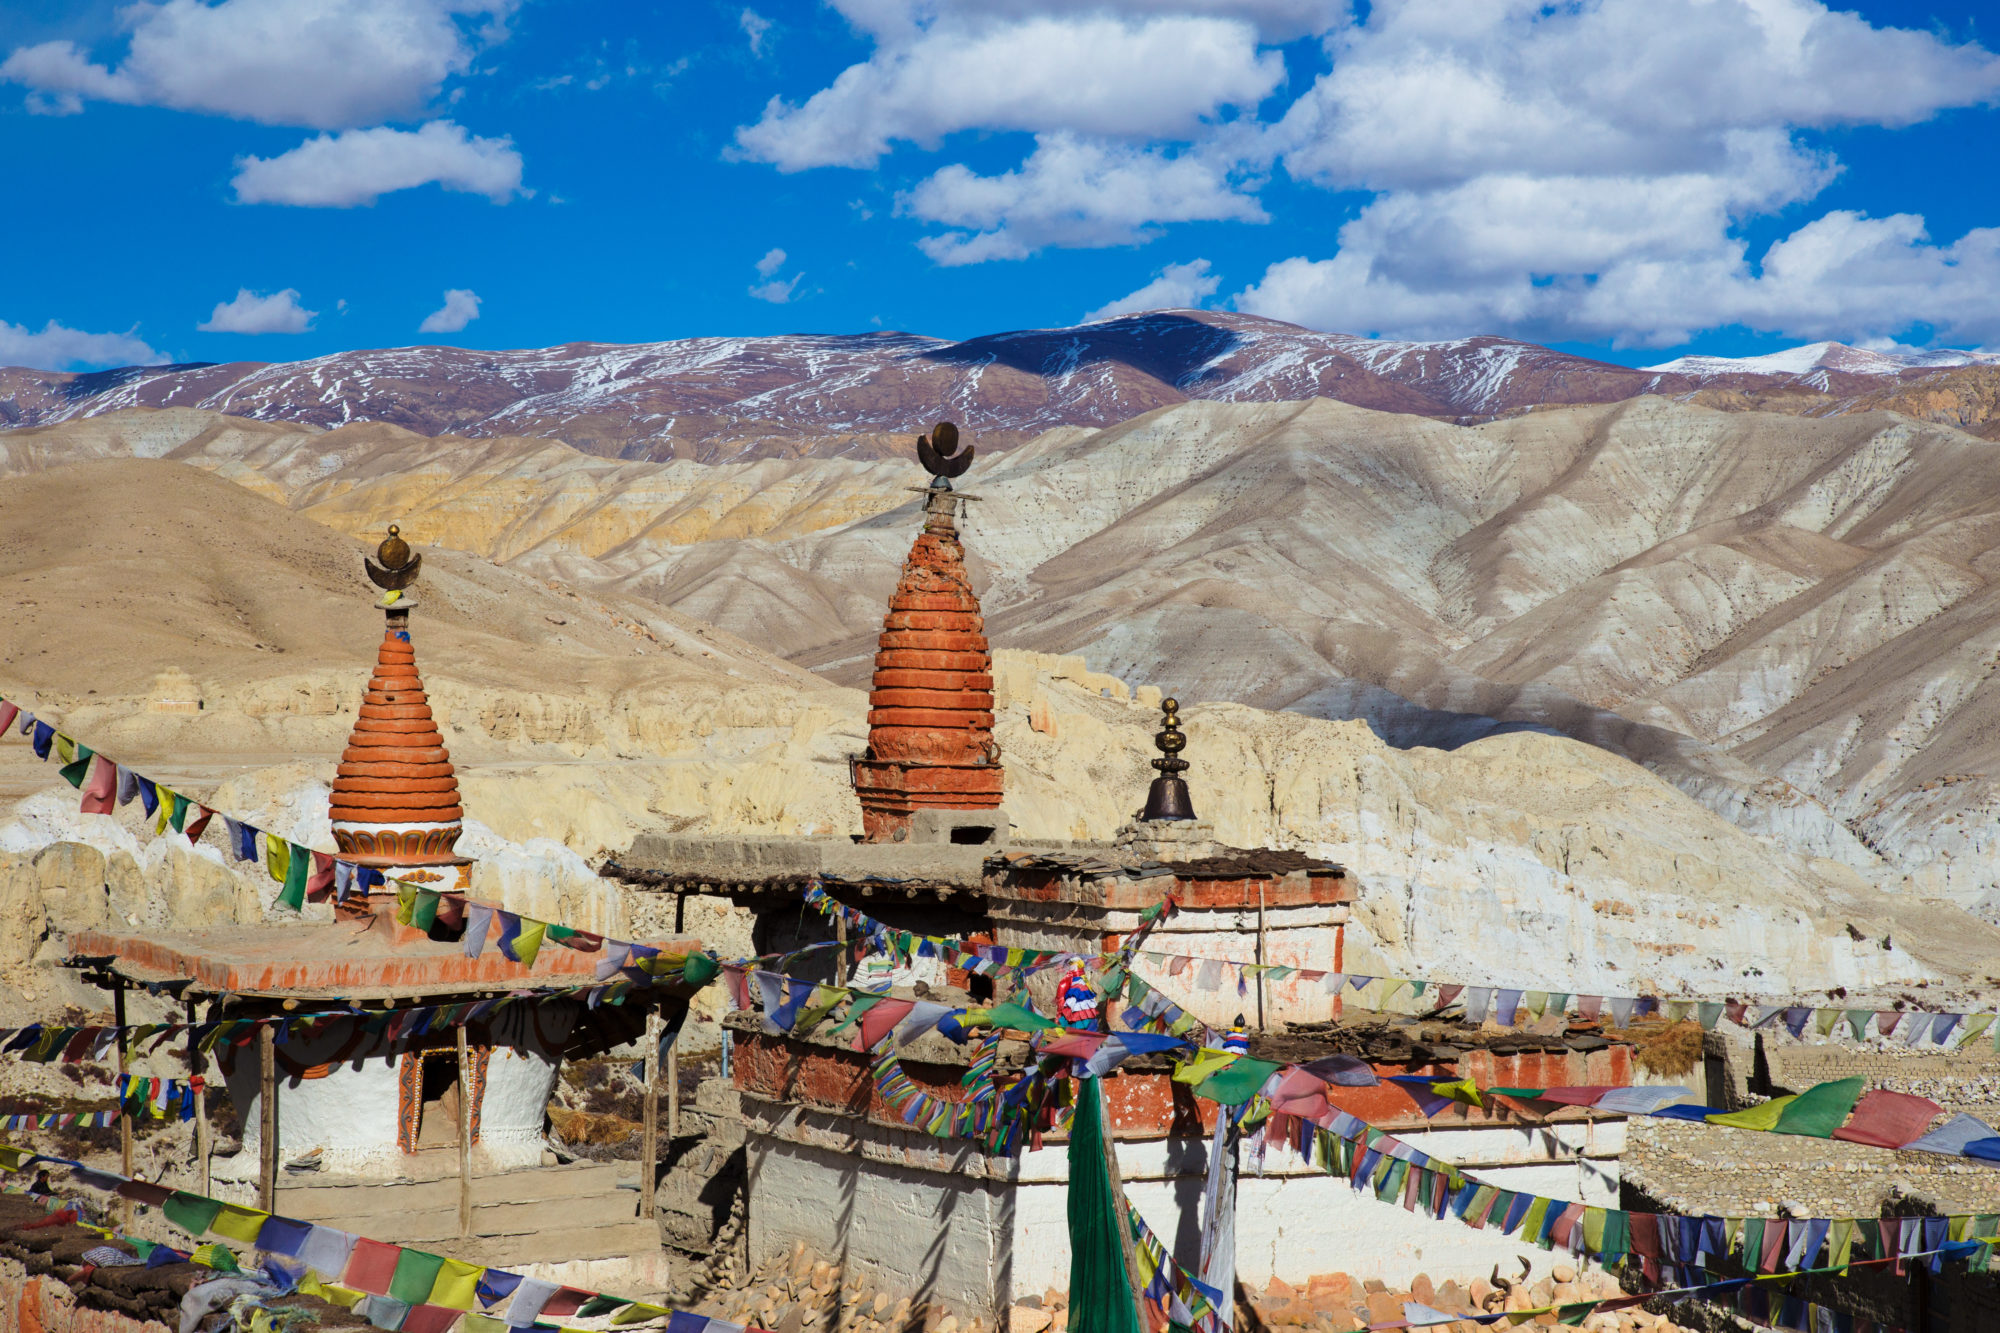 Buddhist chortens (stupa) outside Lo Manthang, the walled capital of the Kingdom of Lo. Photo: J. Hullot/Flickr